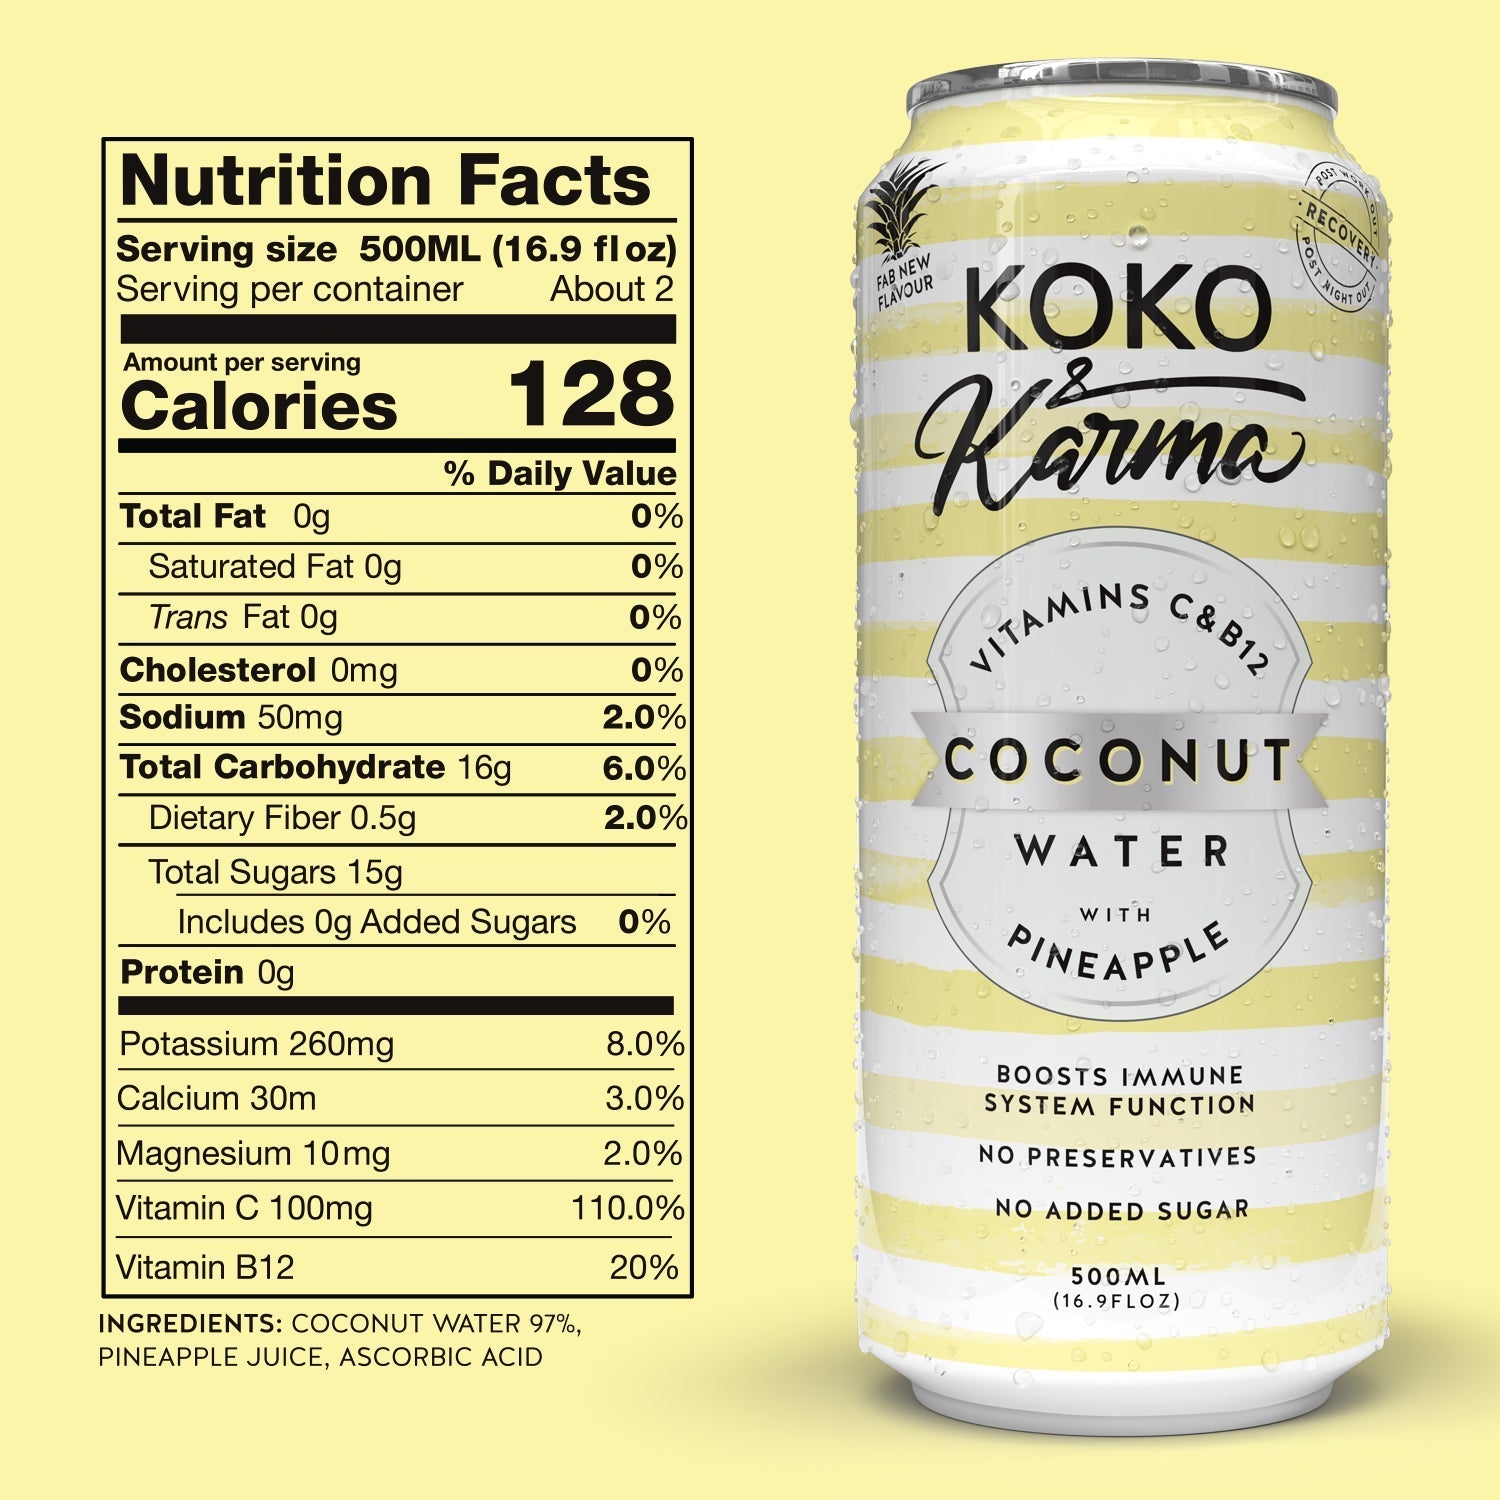 Koko & Karma - Pineapple, Coconut water with added Vitamin C 12 Pack Case of 16.9oz cans